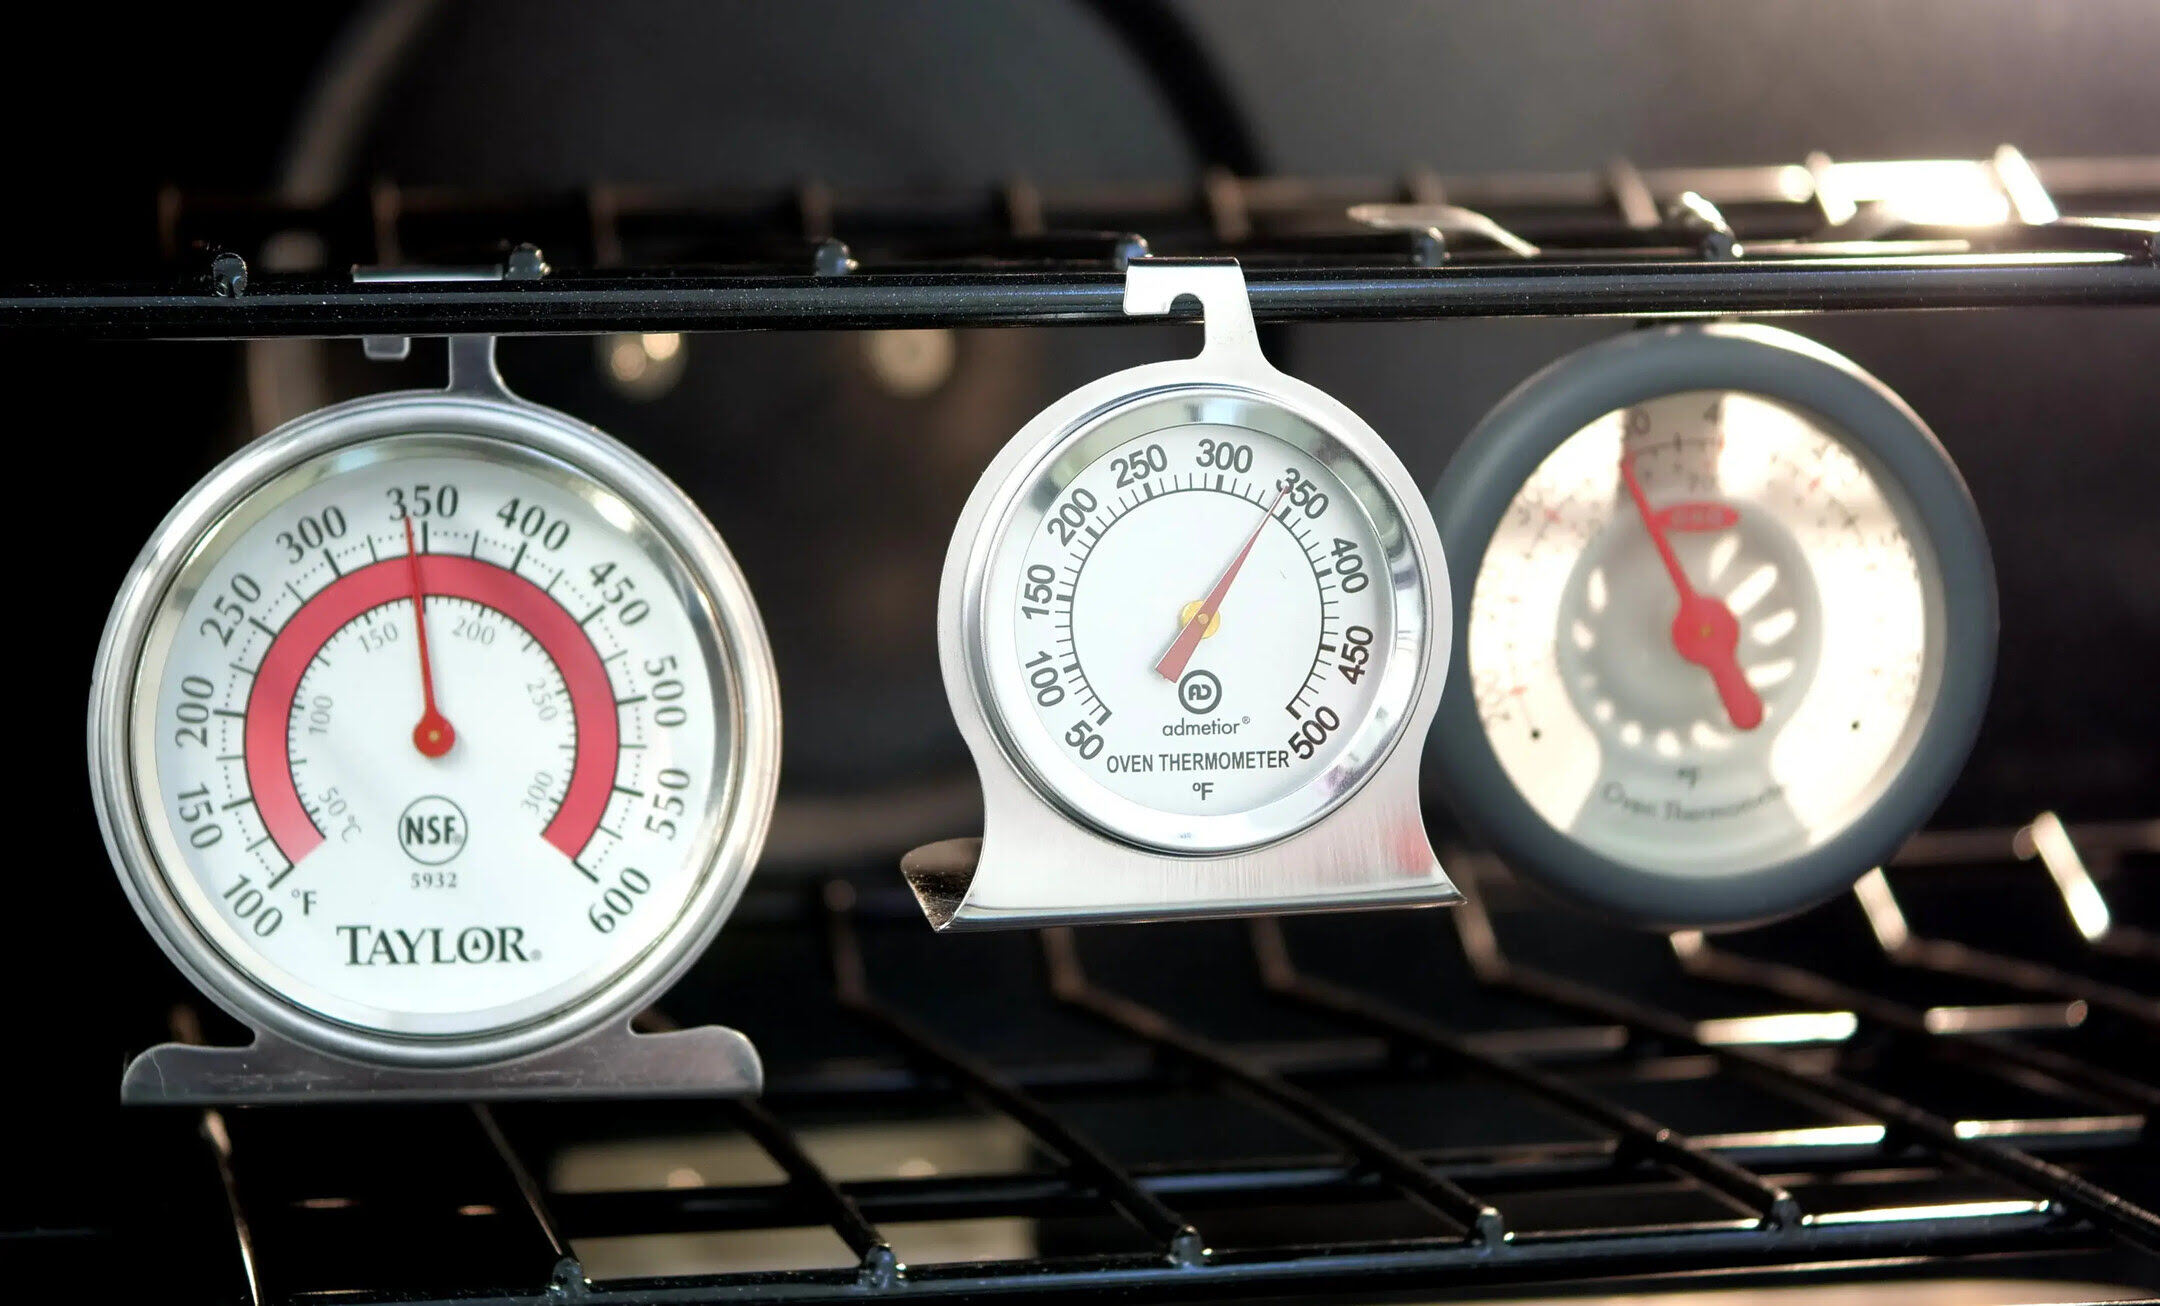 Oven Thermometer Review: Accurate Temperature Monitoring